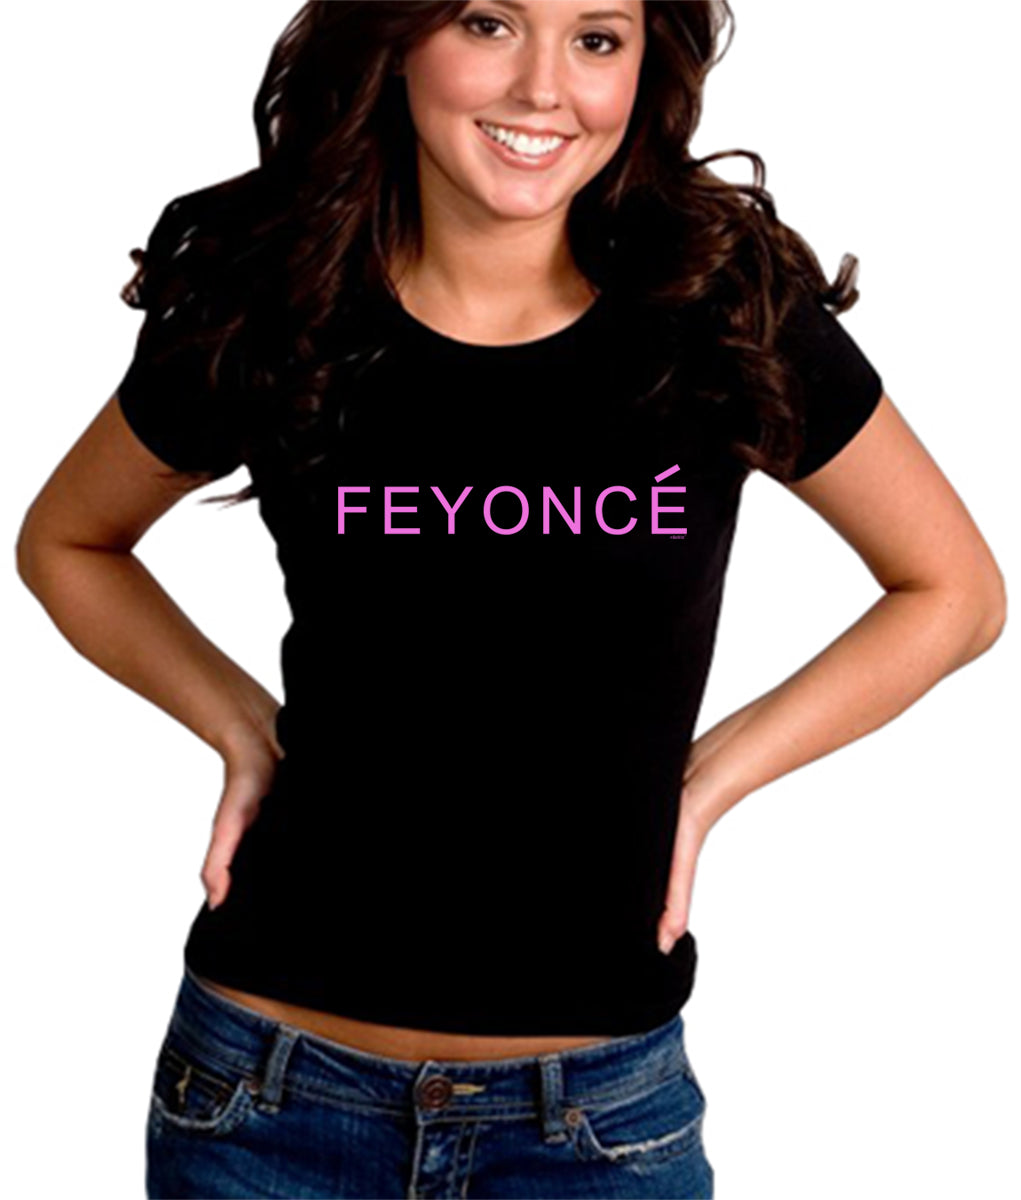 Bride To Be Feyonce Fiance Girl's T-Shirt